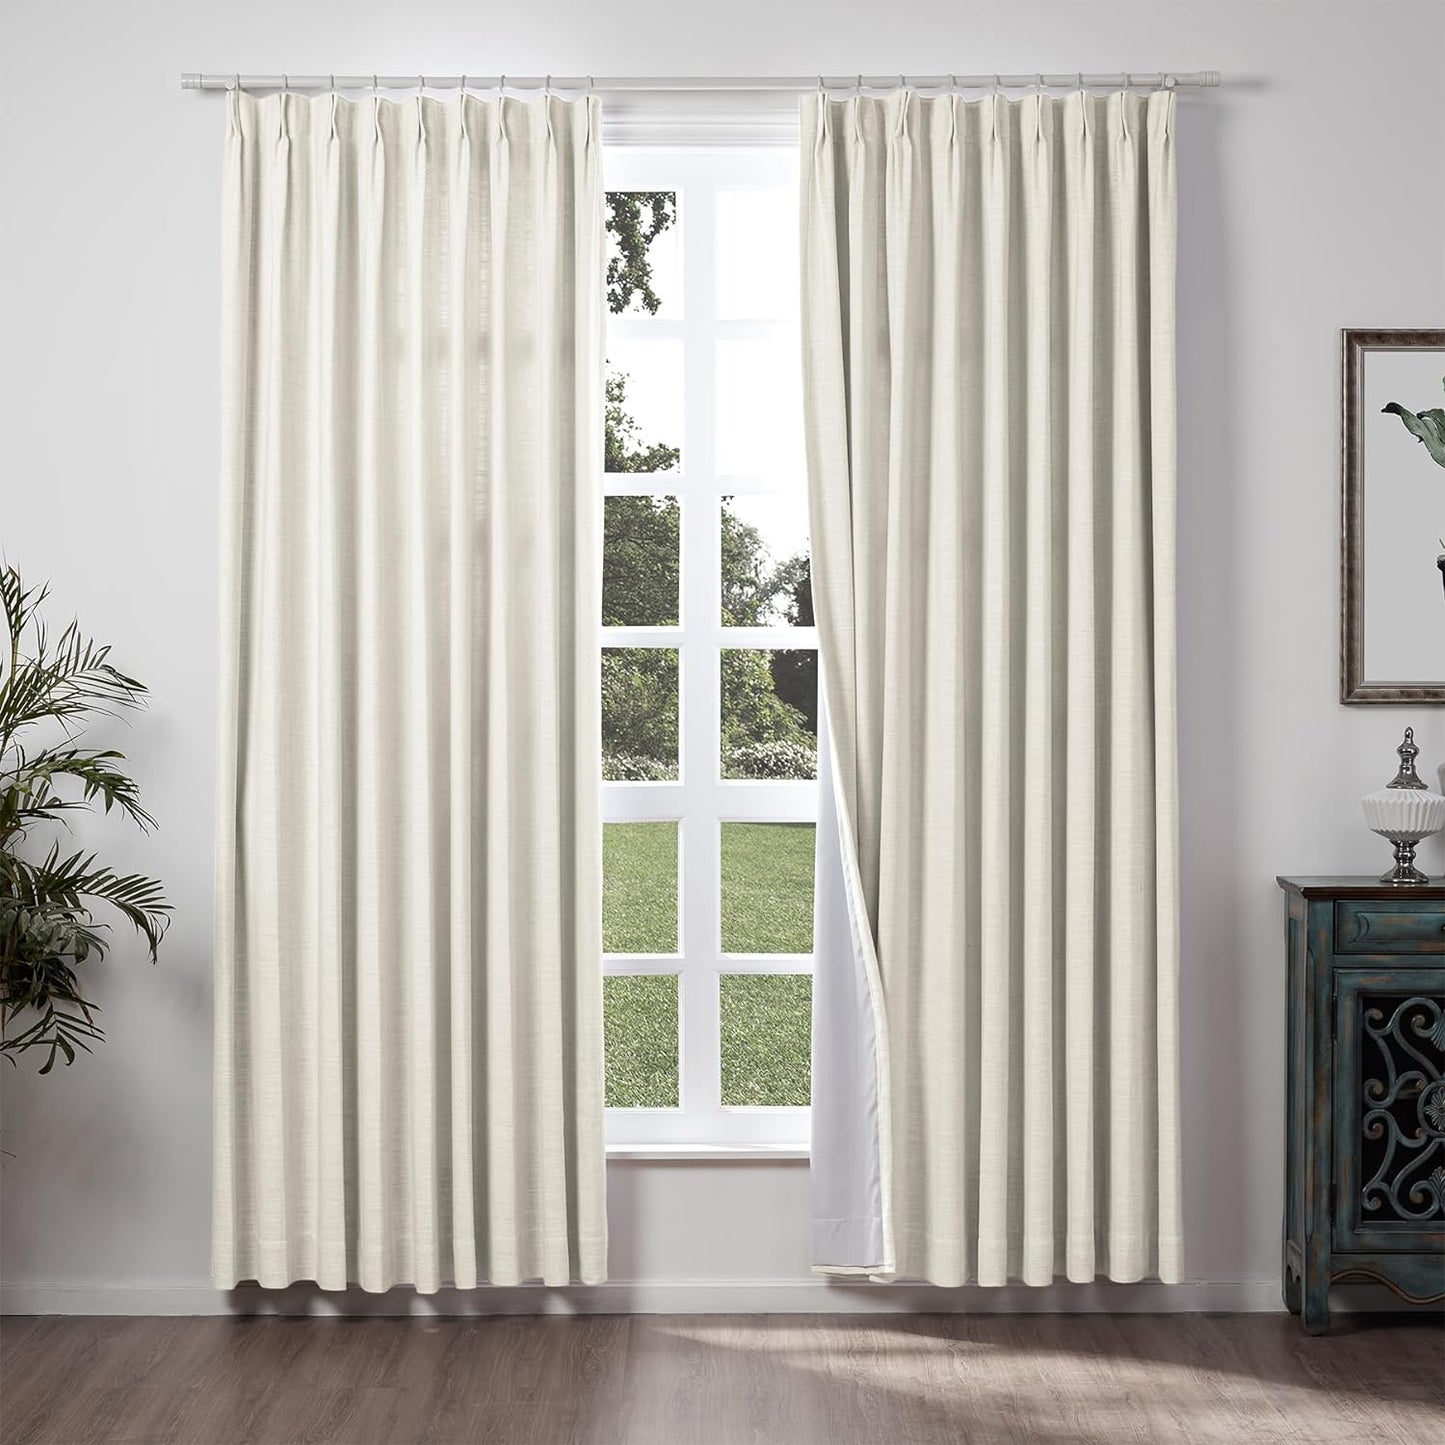 Chadmade 50" W X 84" L Polyester Linen Drape with Blackout Lining Pinch Pleat Curtain for Sliding Door Patio Door Living Room Bedroom, (1 Panel) Beige White Liz Collection  ChadMade Ivory White (2) 72Wx84L 